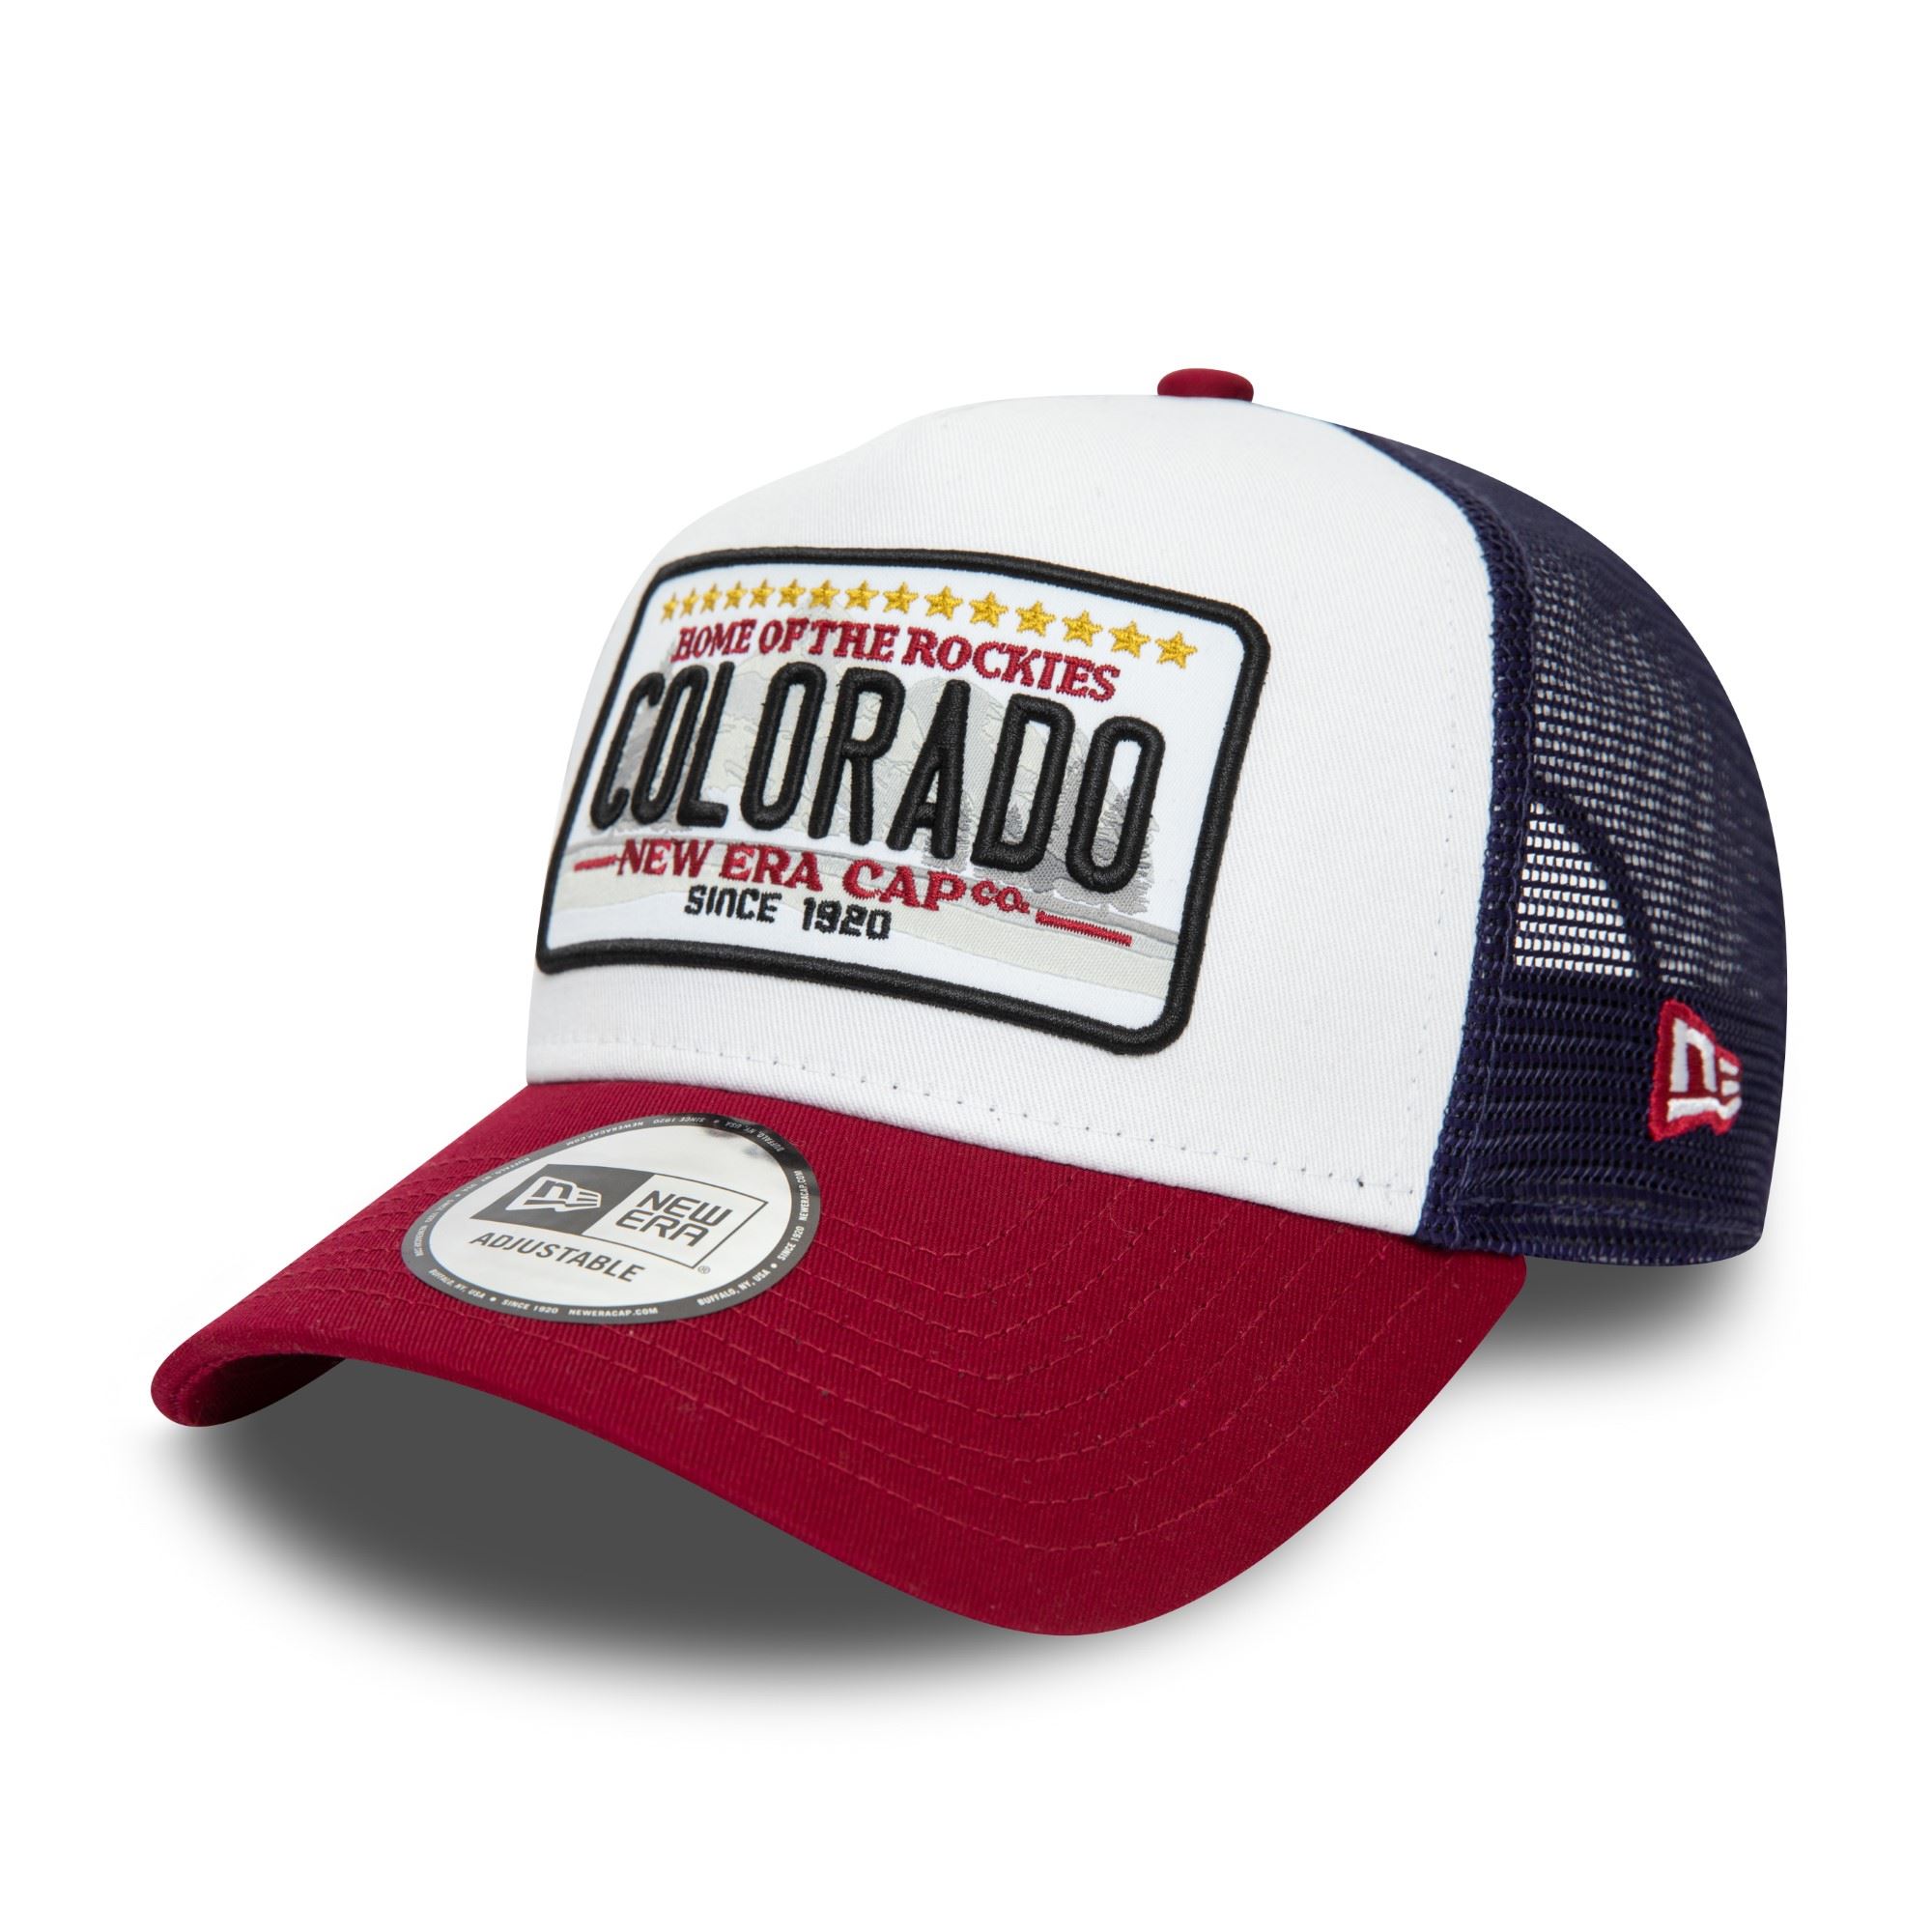 Colorado State Patch White Maroon Navy A-Frame Adjustable Trucker Cap New Era